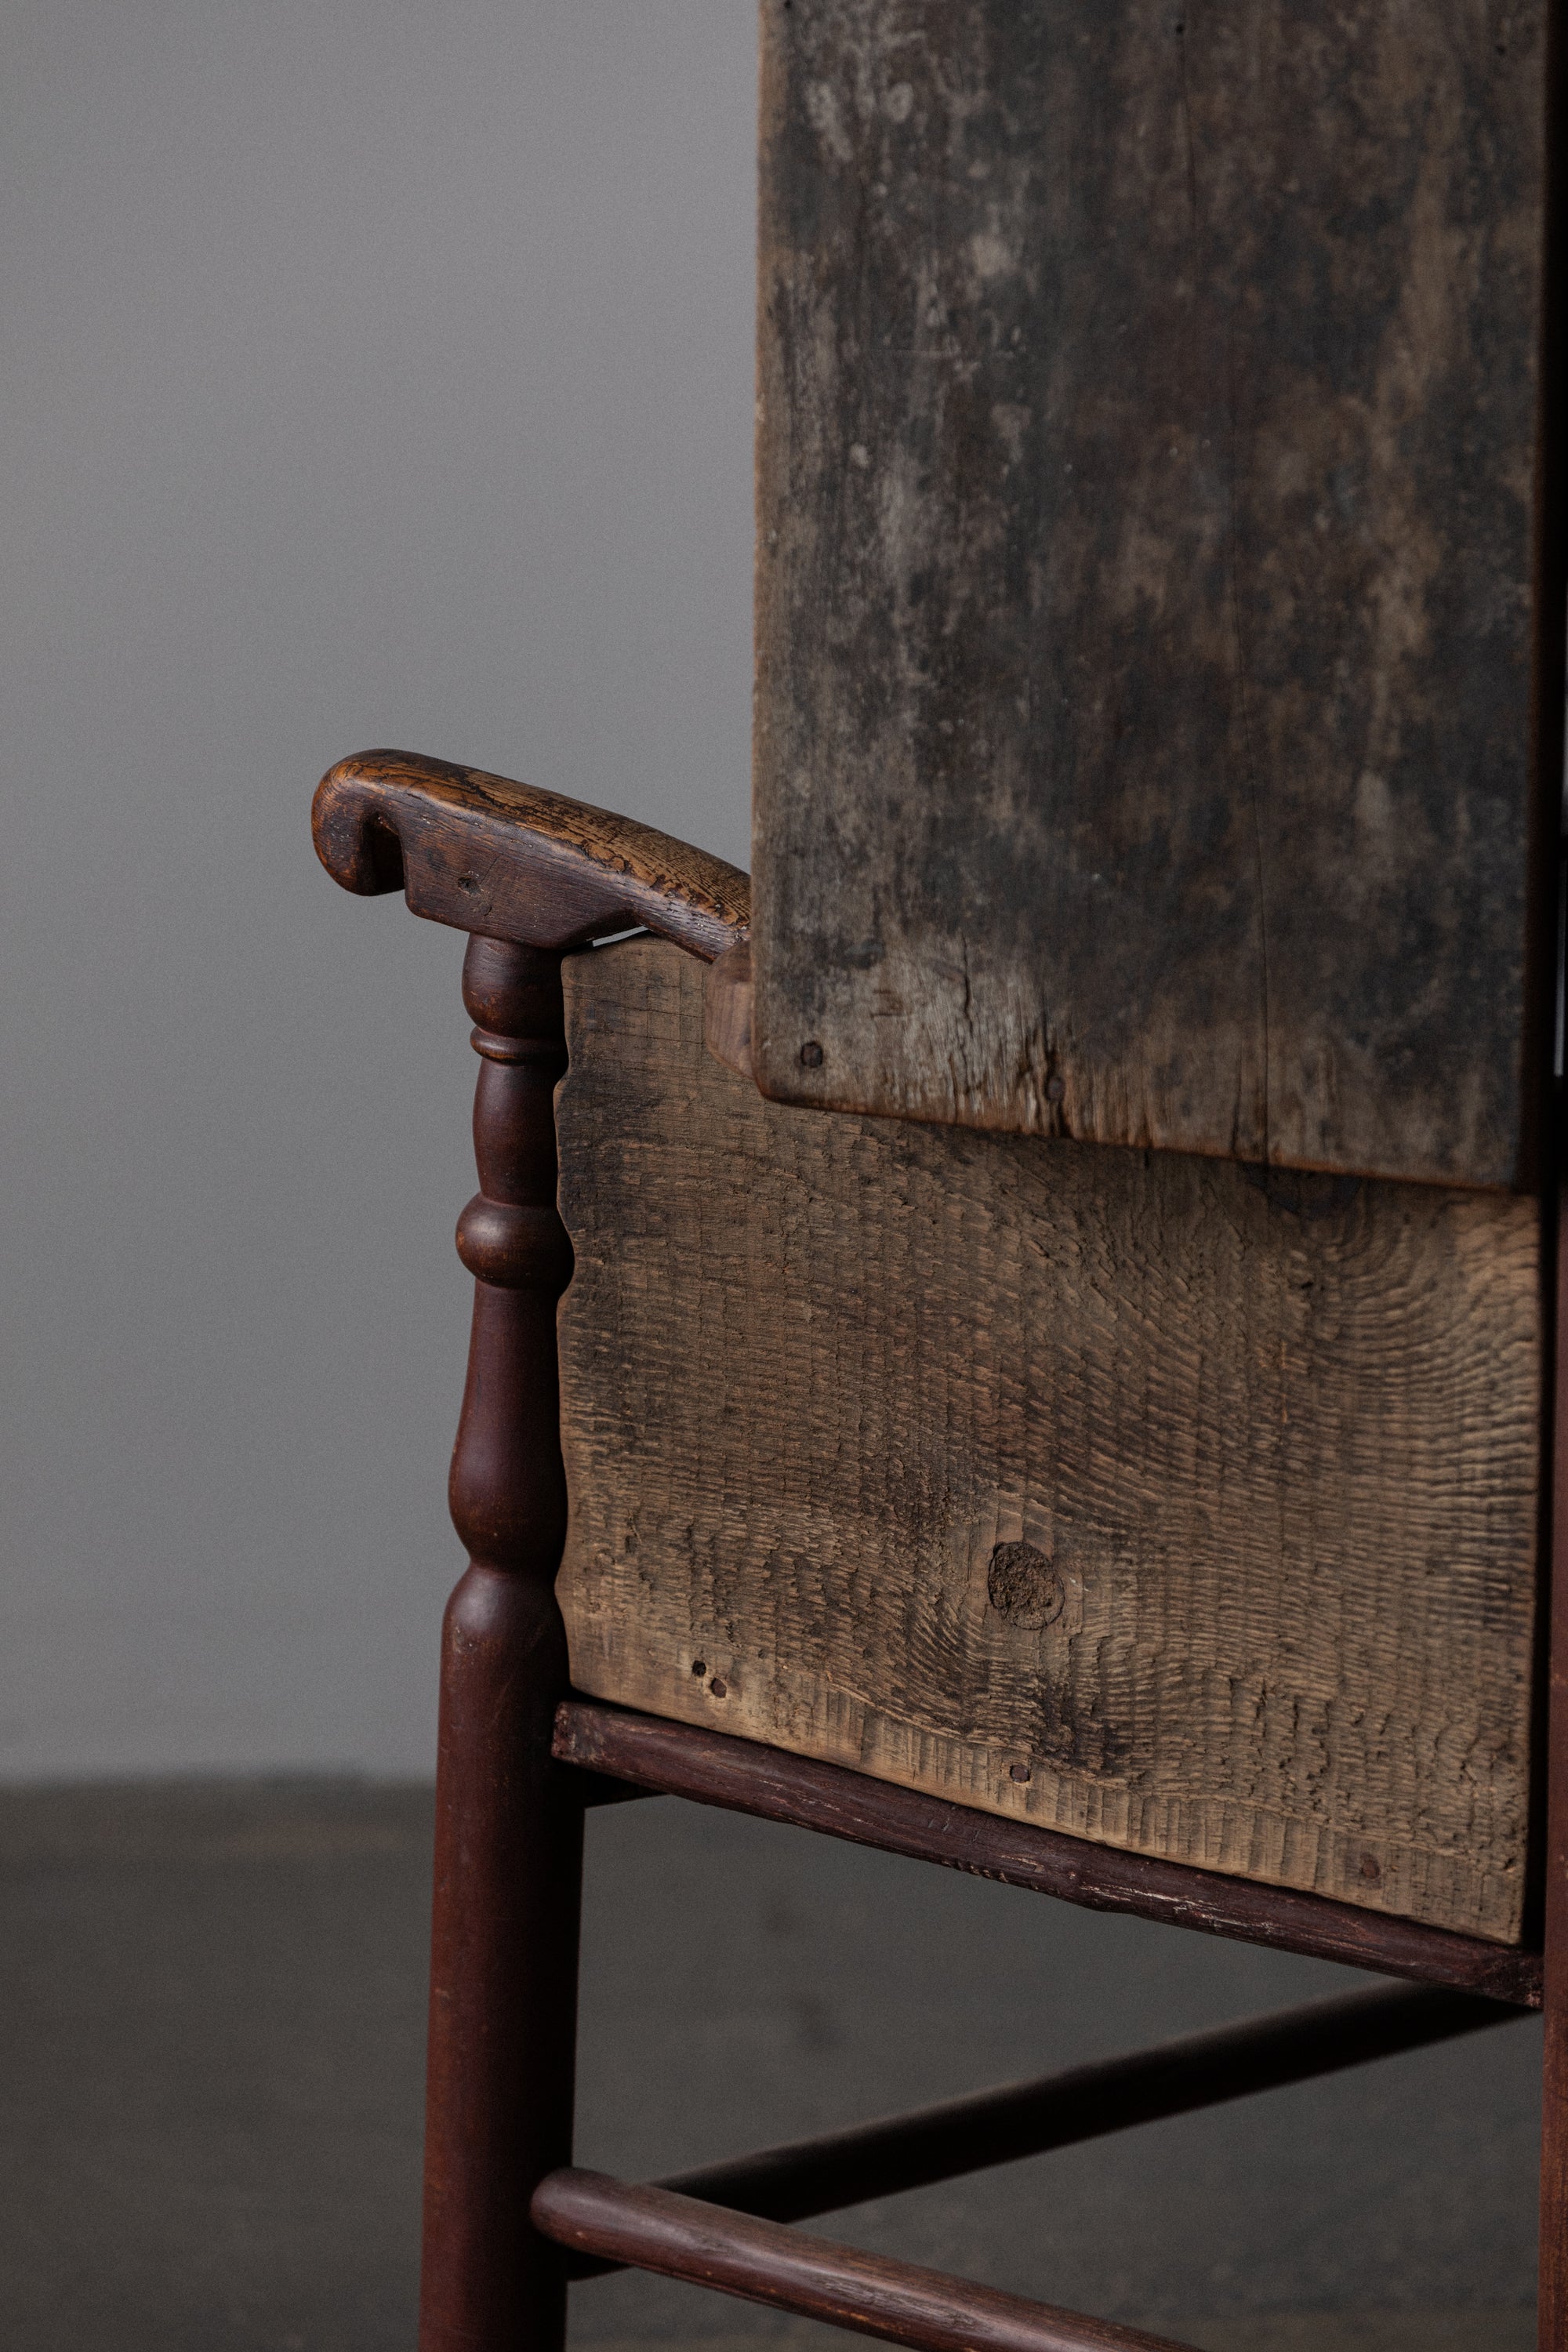 Early American Wooden Highback Wingchair